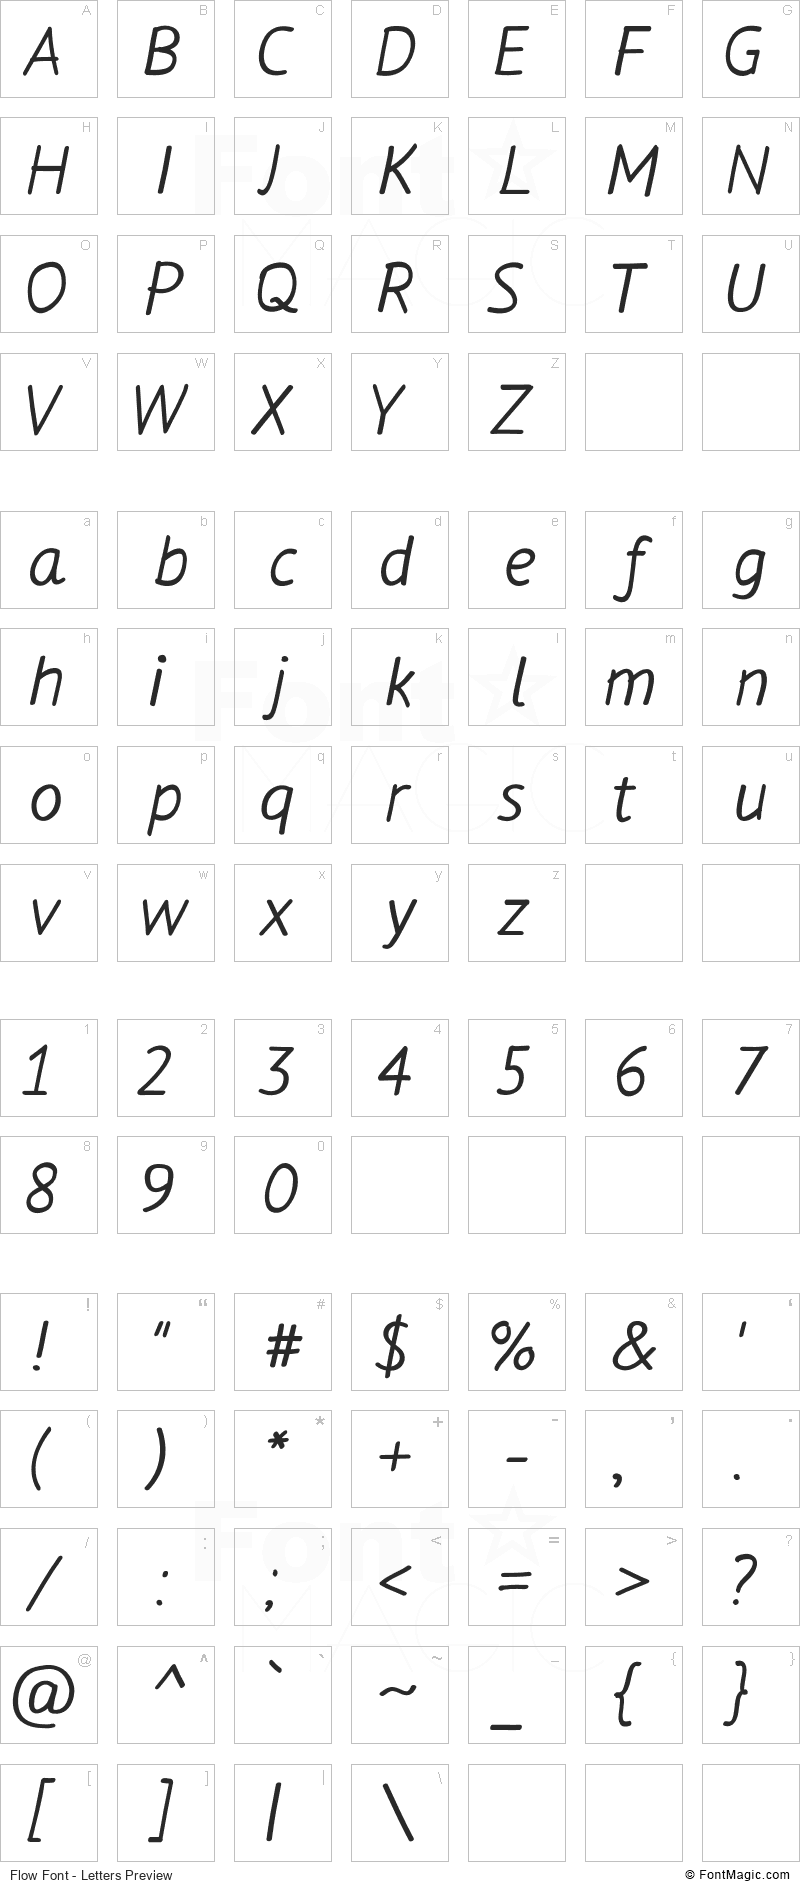 Flow Font - All Latters Preview Chart